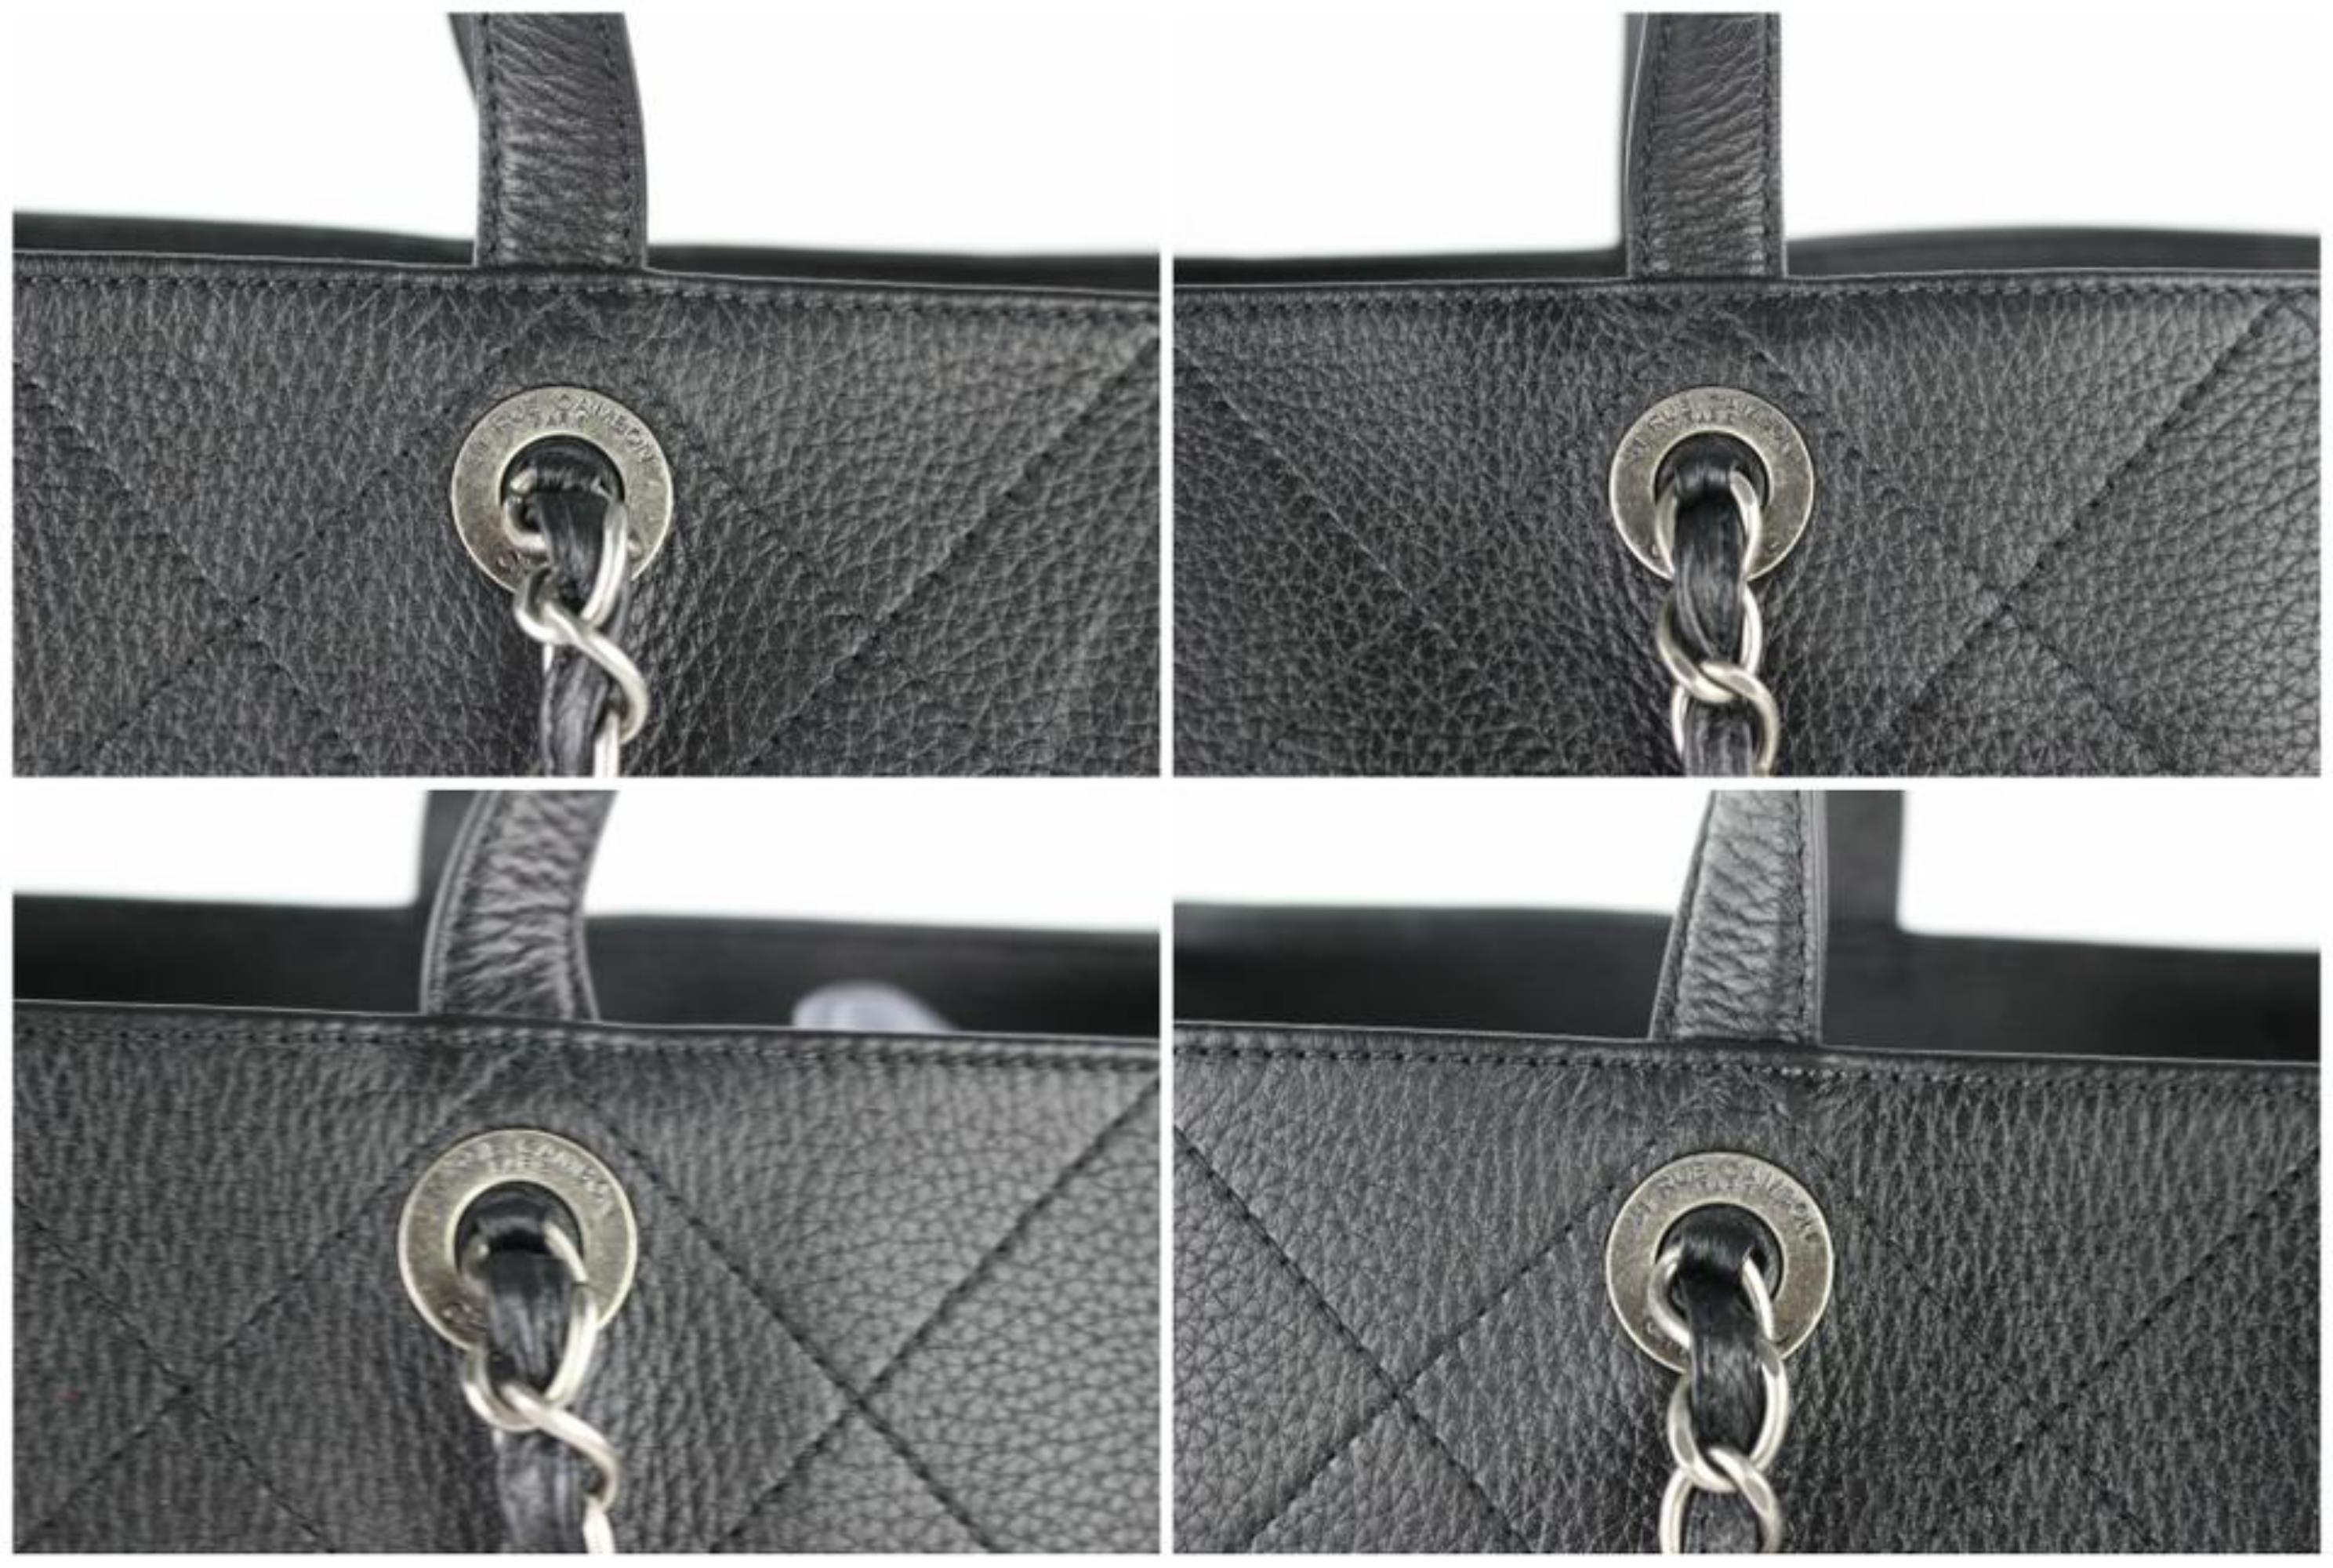 Chanel Quilted Caviar 2way Shopper Tote 3cz0116 Black Leather Shoulder Bag For Sale 5